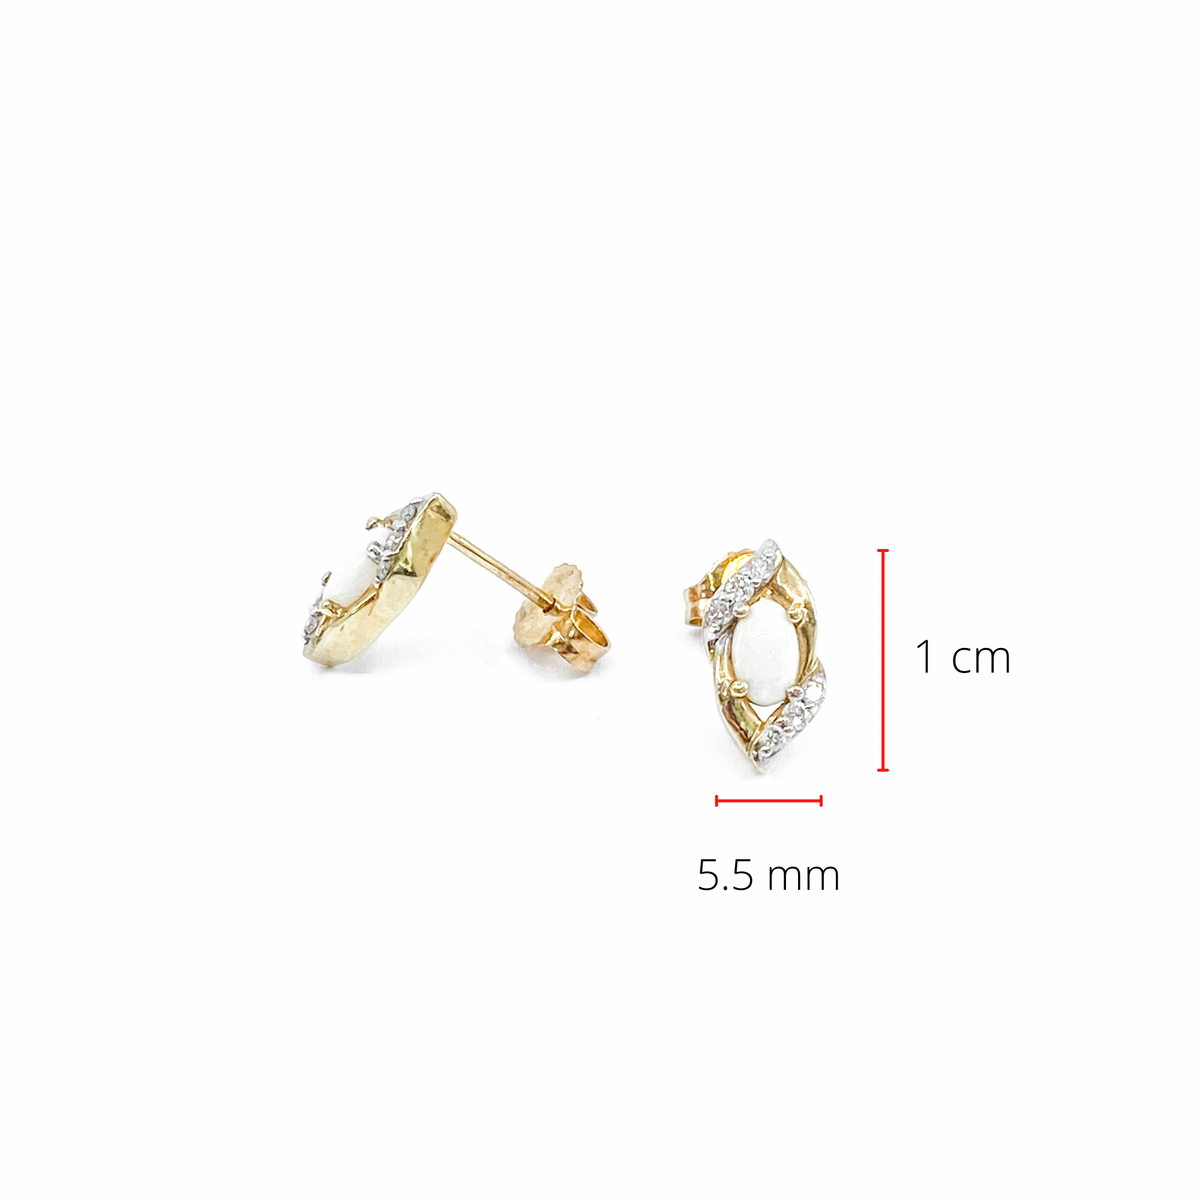 10K Yellow Gold 0.15cttw Genuine Opal and 0.10cttw Diamond Earrings